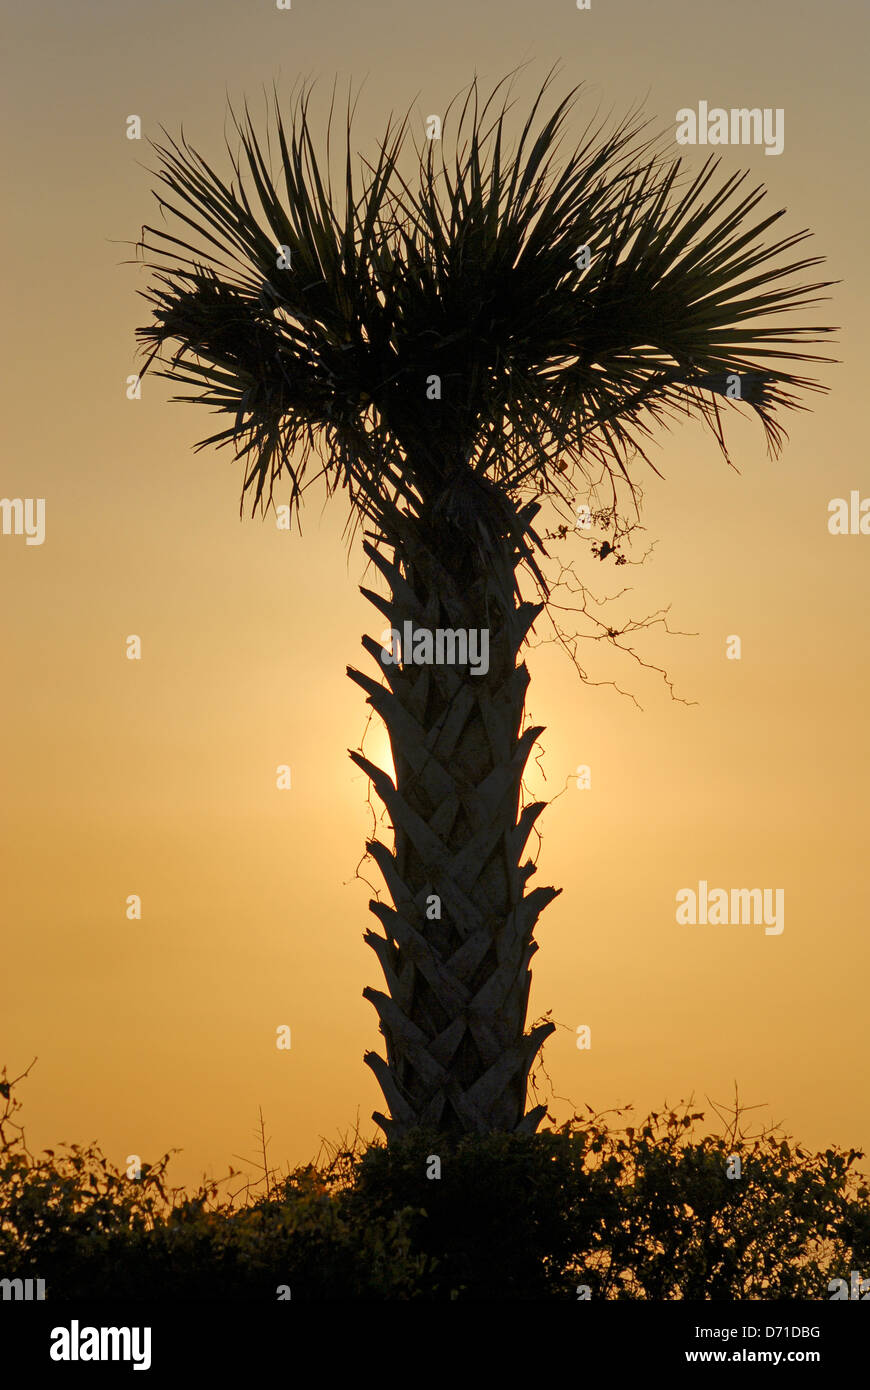 A palmetto tree is silhouetted at sunset along a beach near Charleston, South Carolina, United States of America Stock Photo